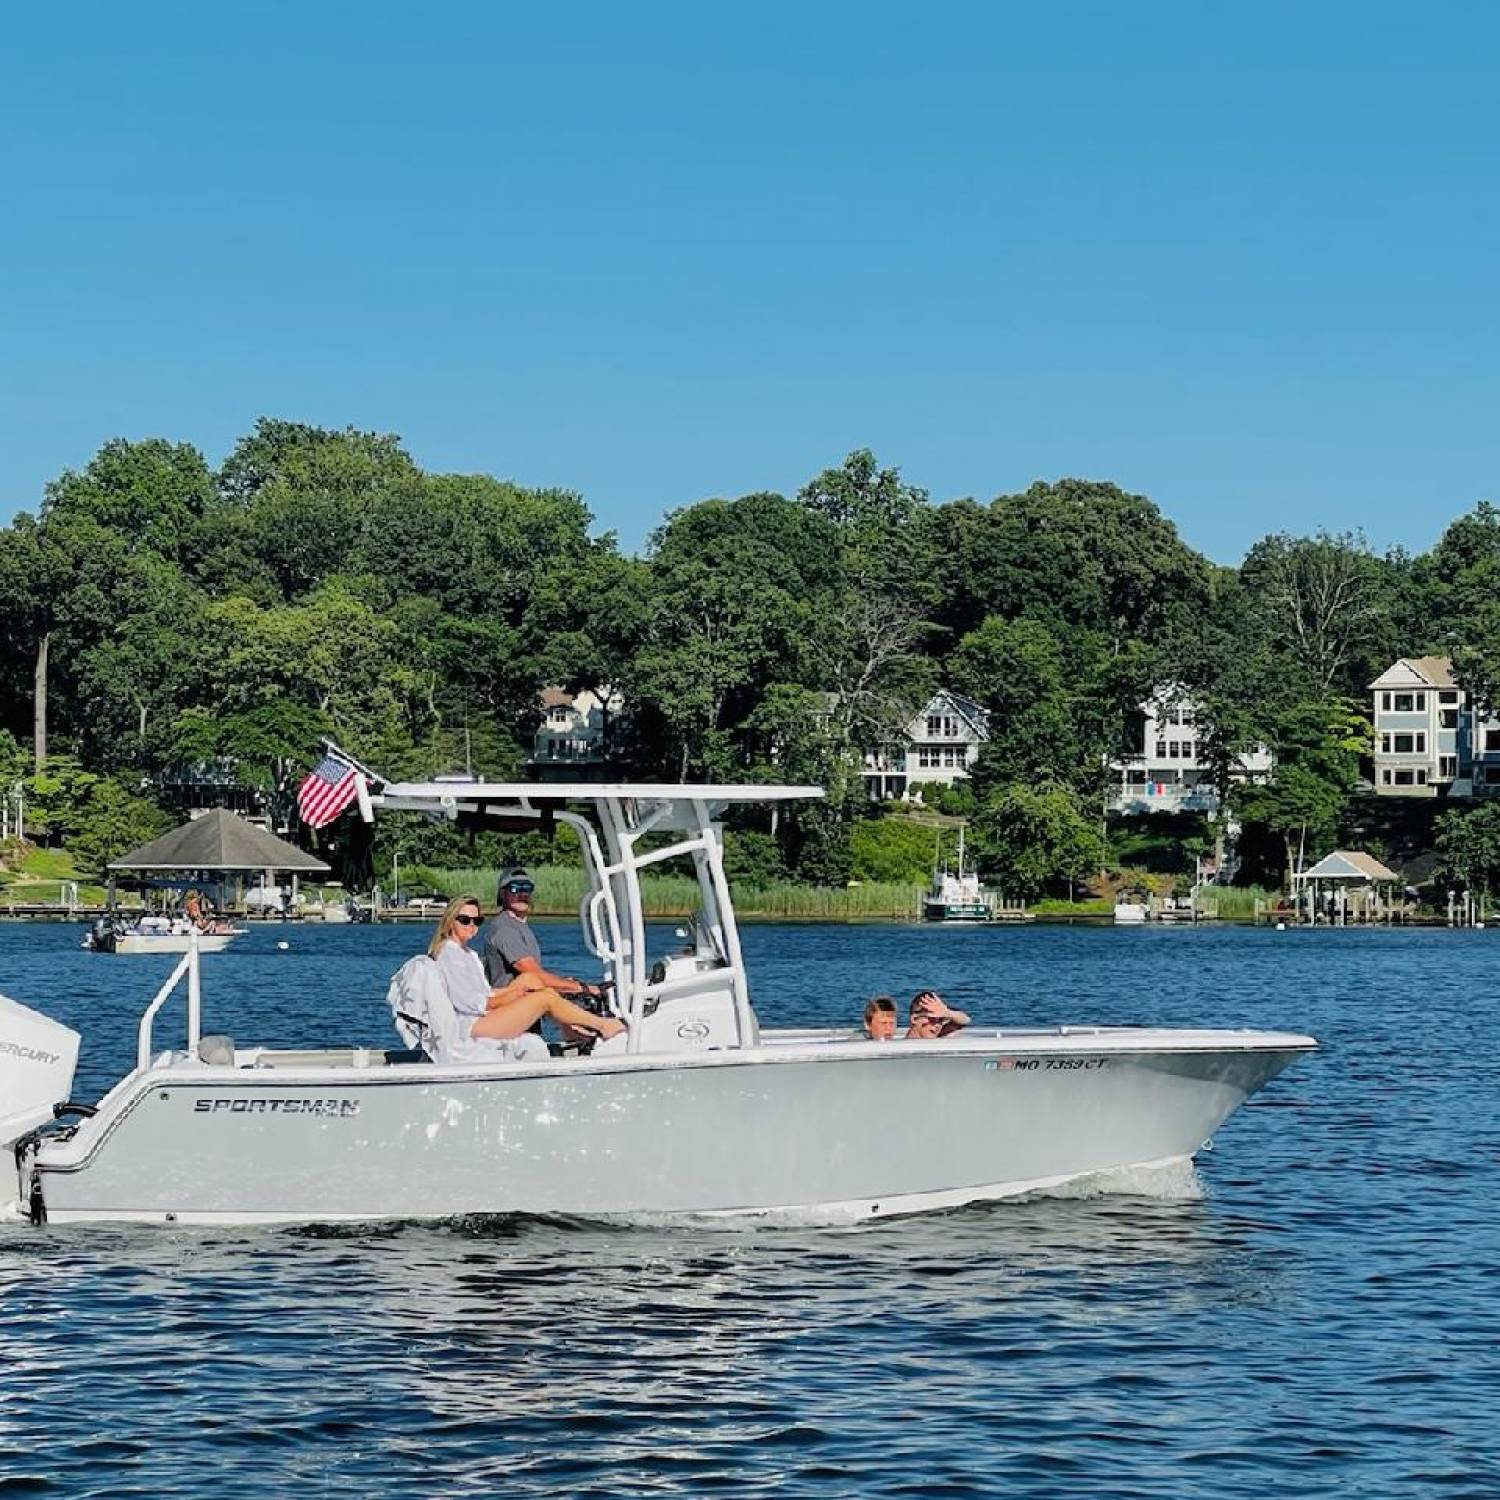 Title: Heading out for some family fun. - On board their Sportsman Heritage 231 Center Console - Location: Severn river, Chesapeake bay Maryland. Participating in the Photo Contest #SportsmanAugust